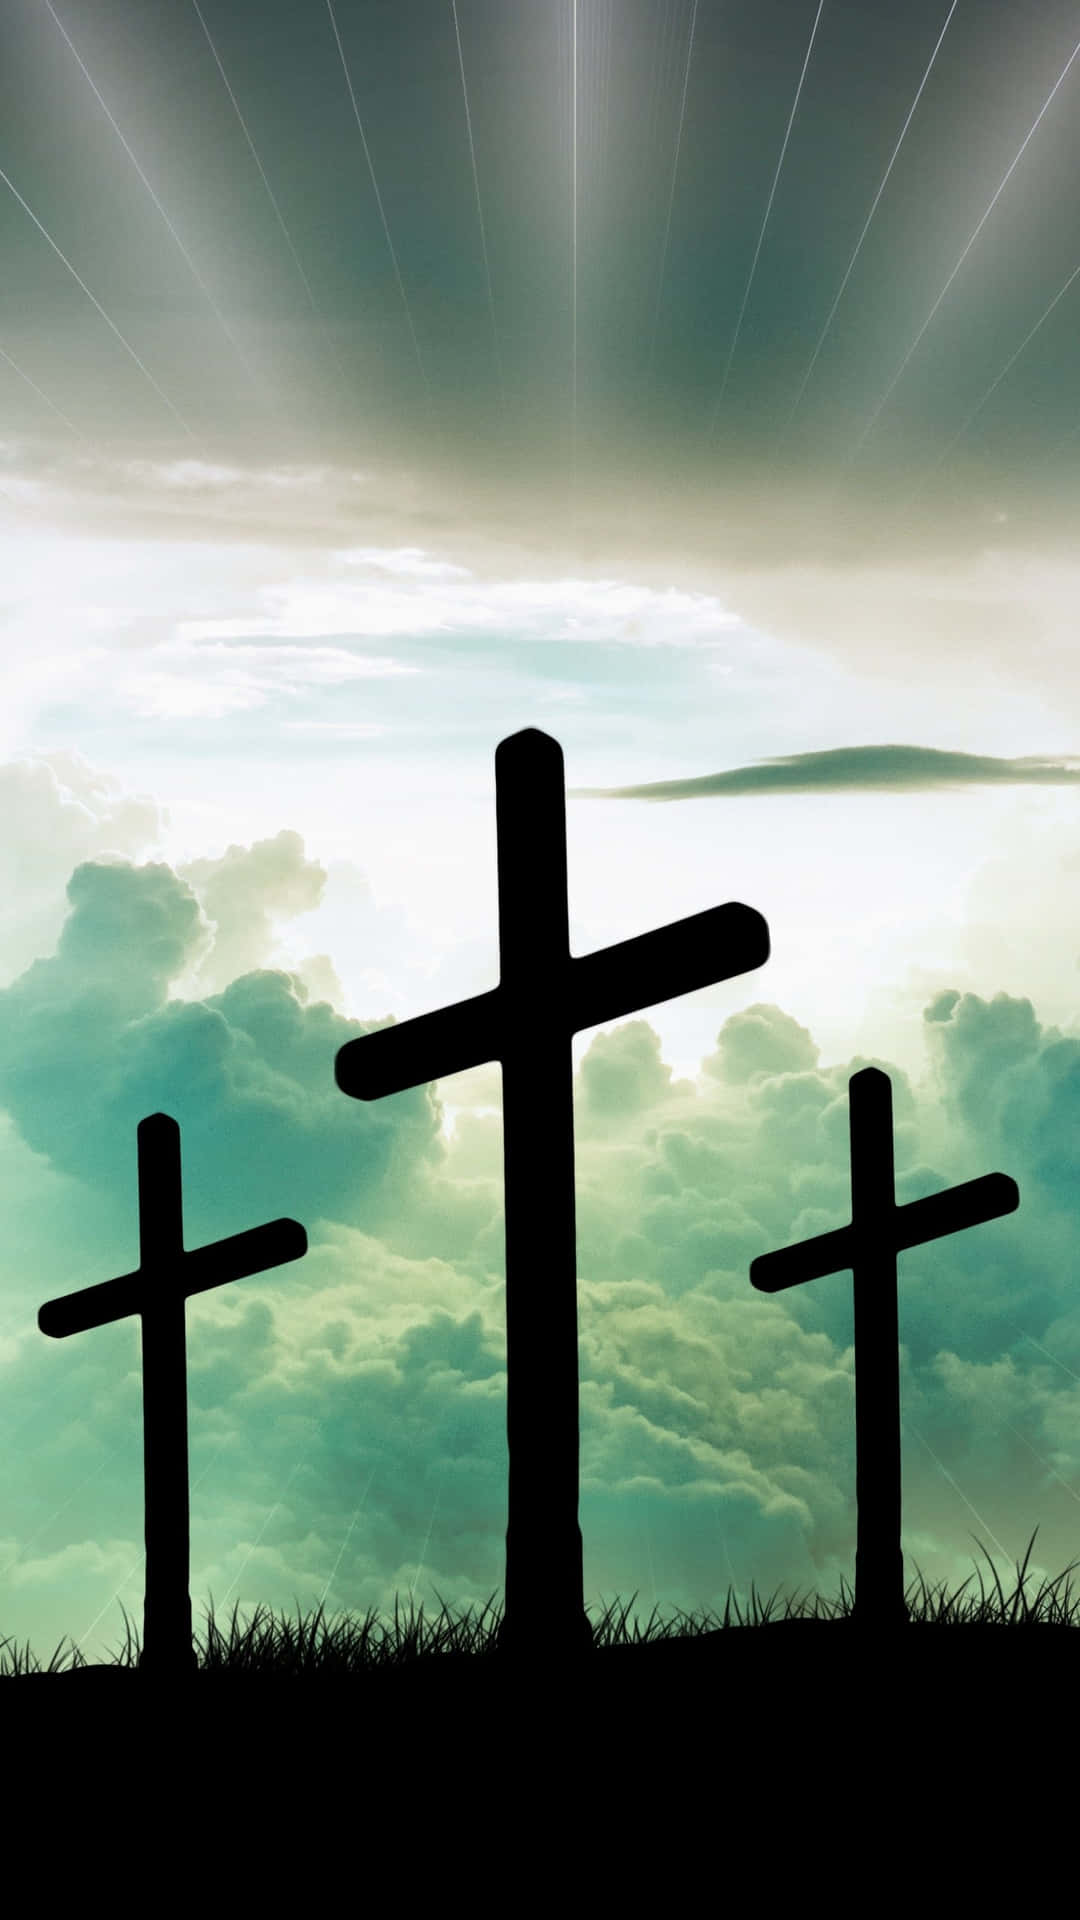 "A sweet, metal cross standing atop a mossy rock surrounded by nature." Wallpaper